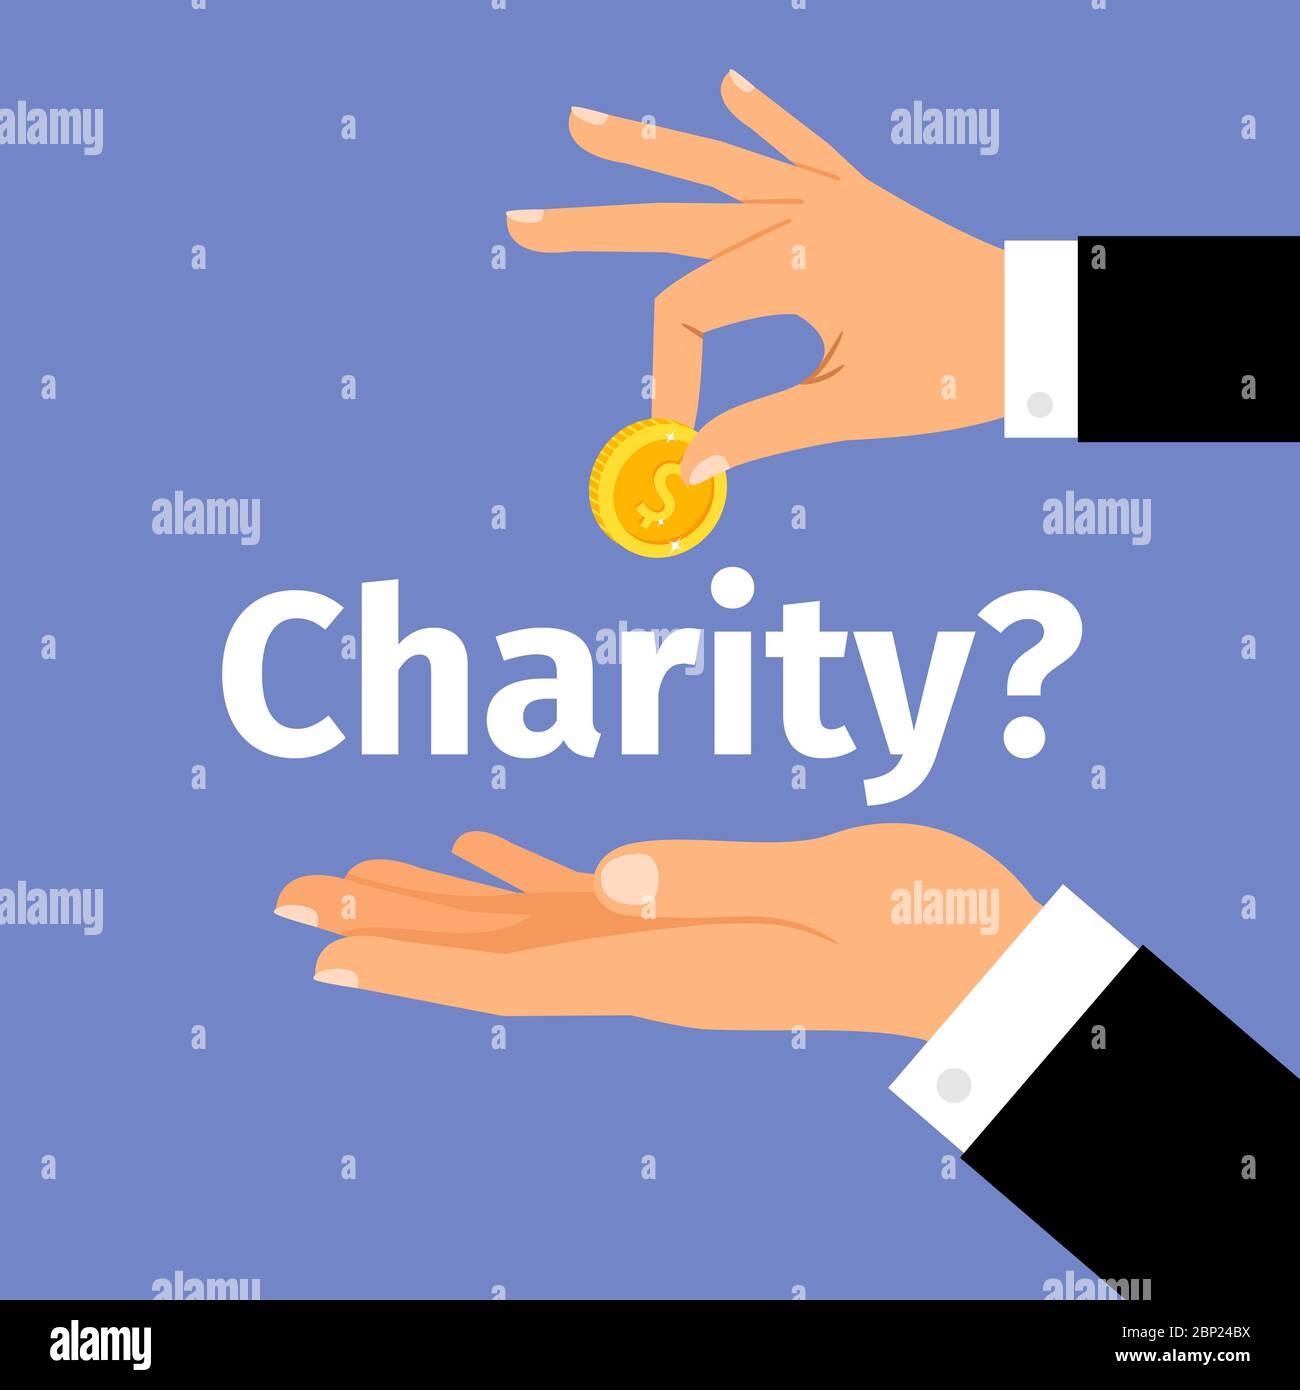 Motivation poster with gestures, money and text charity, vector illustration Stock Vector